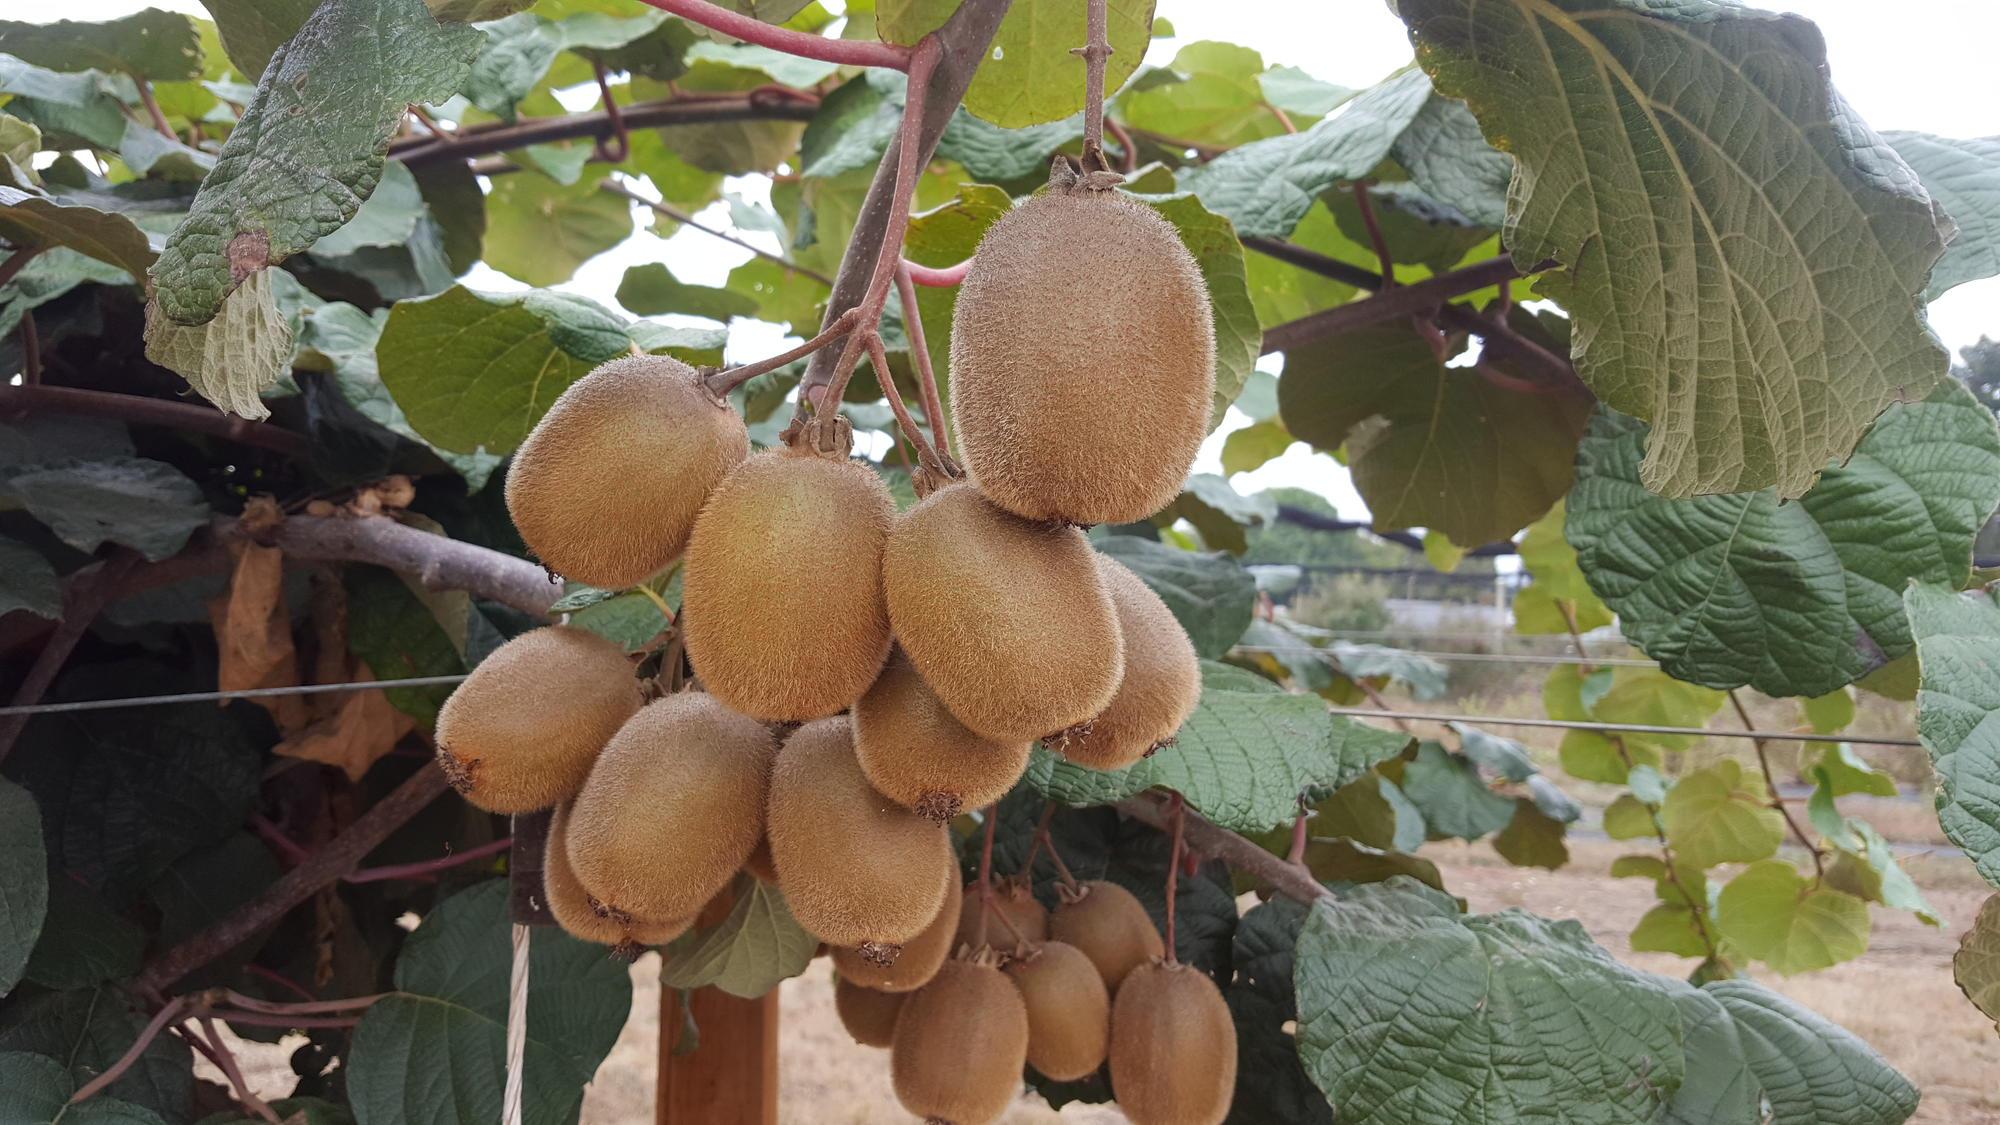 A cluster of kiwifruit growing on a vine.